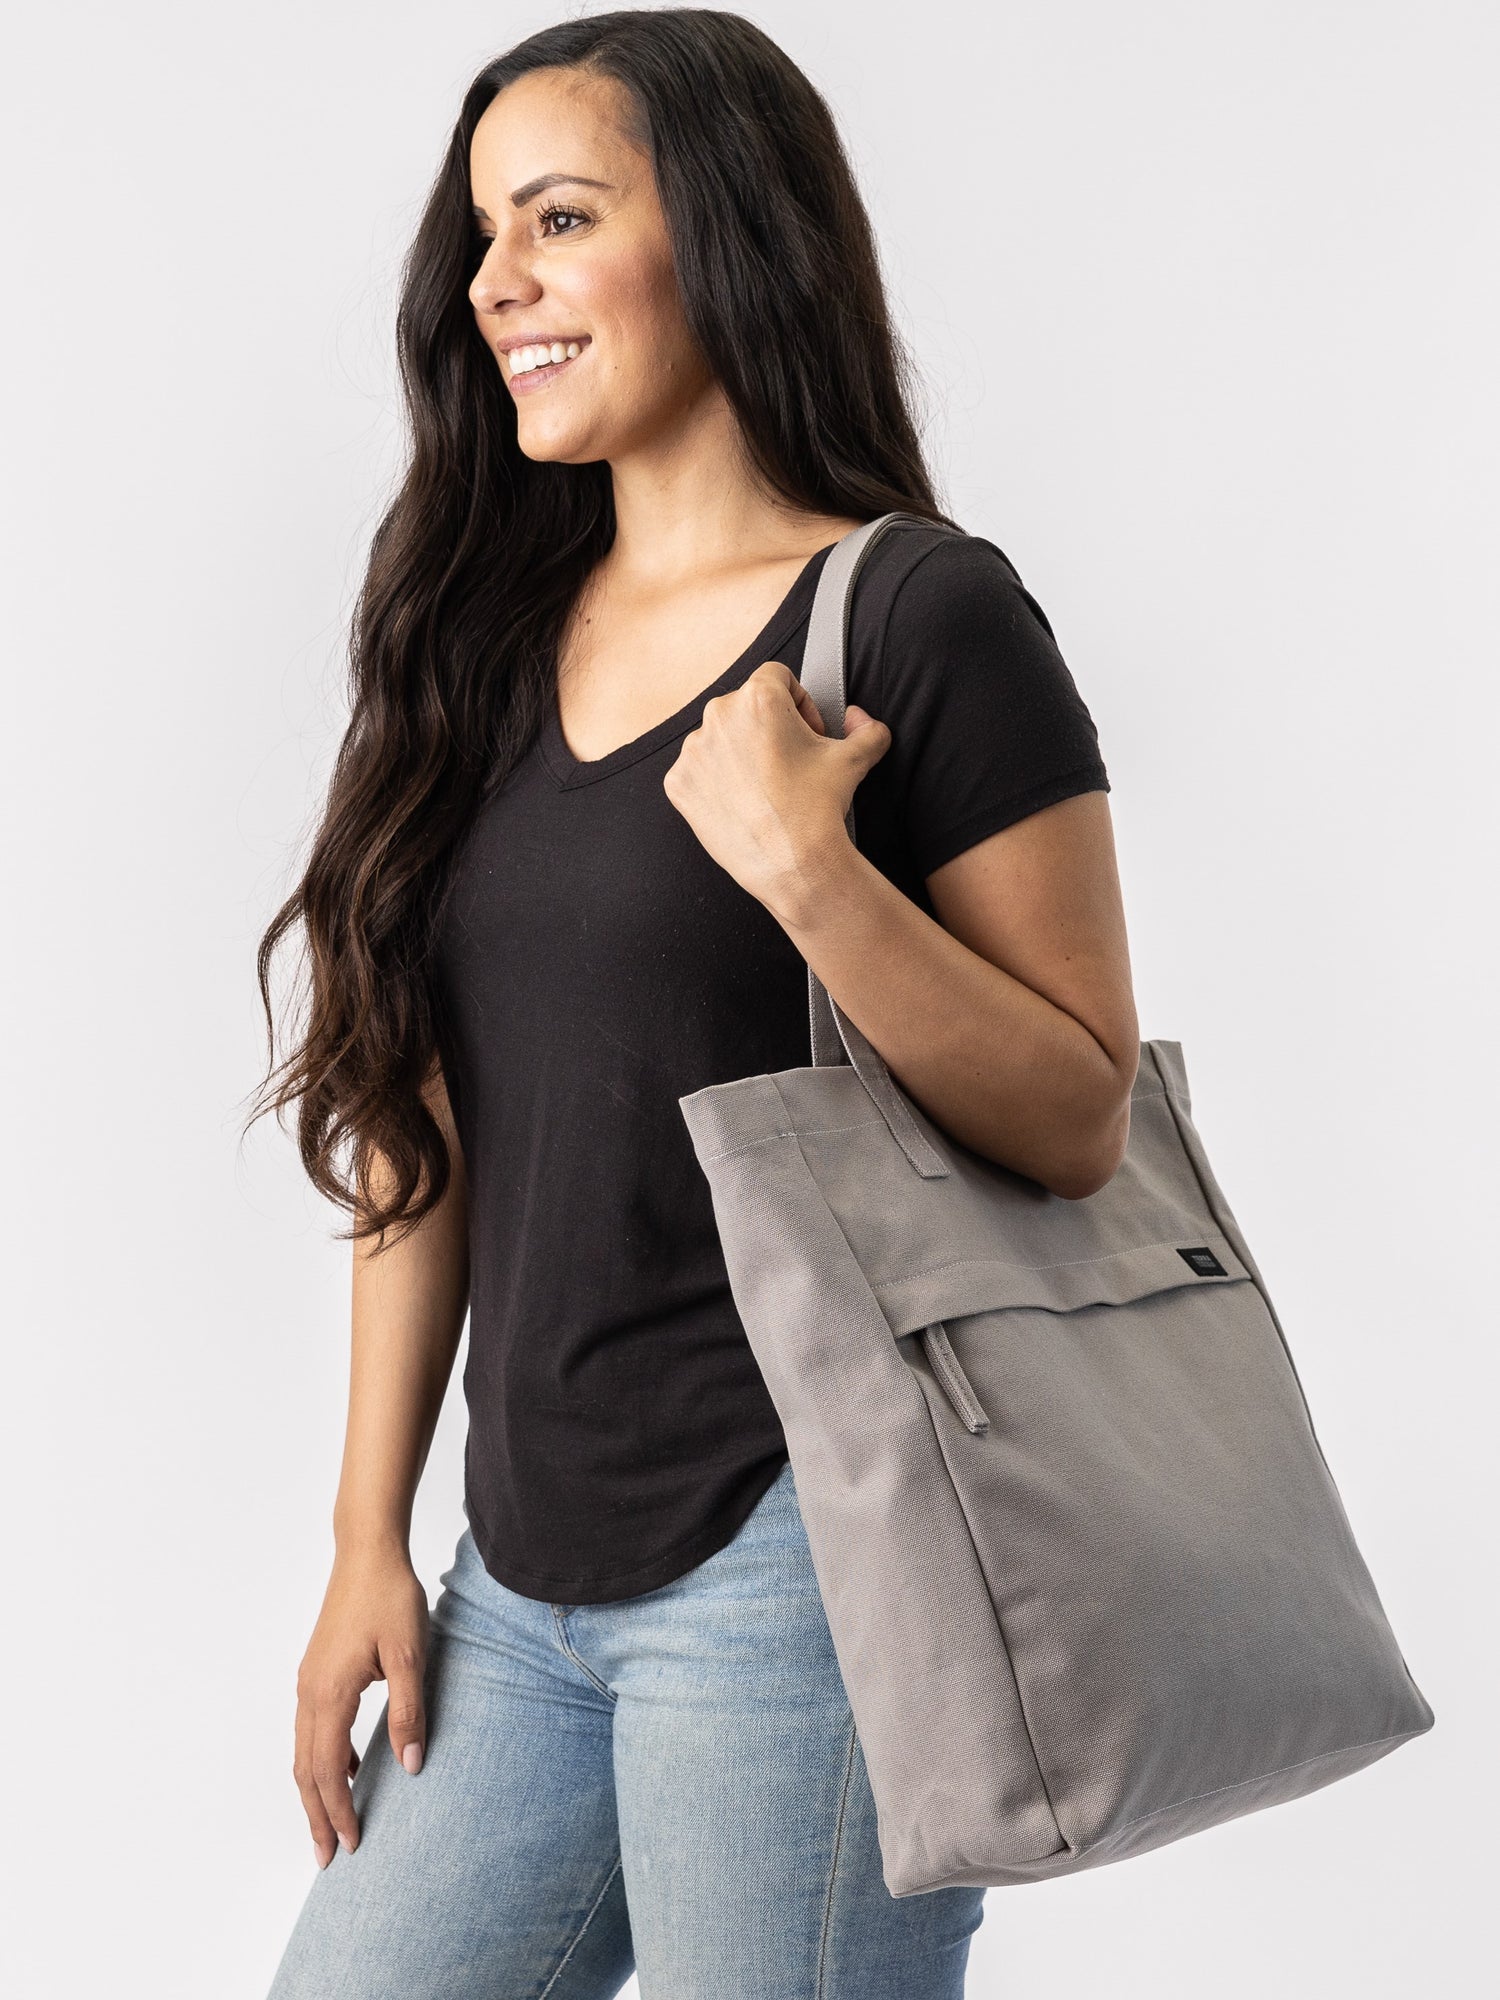 Organic Work tote bag with pockets and compartments – Terra Thread